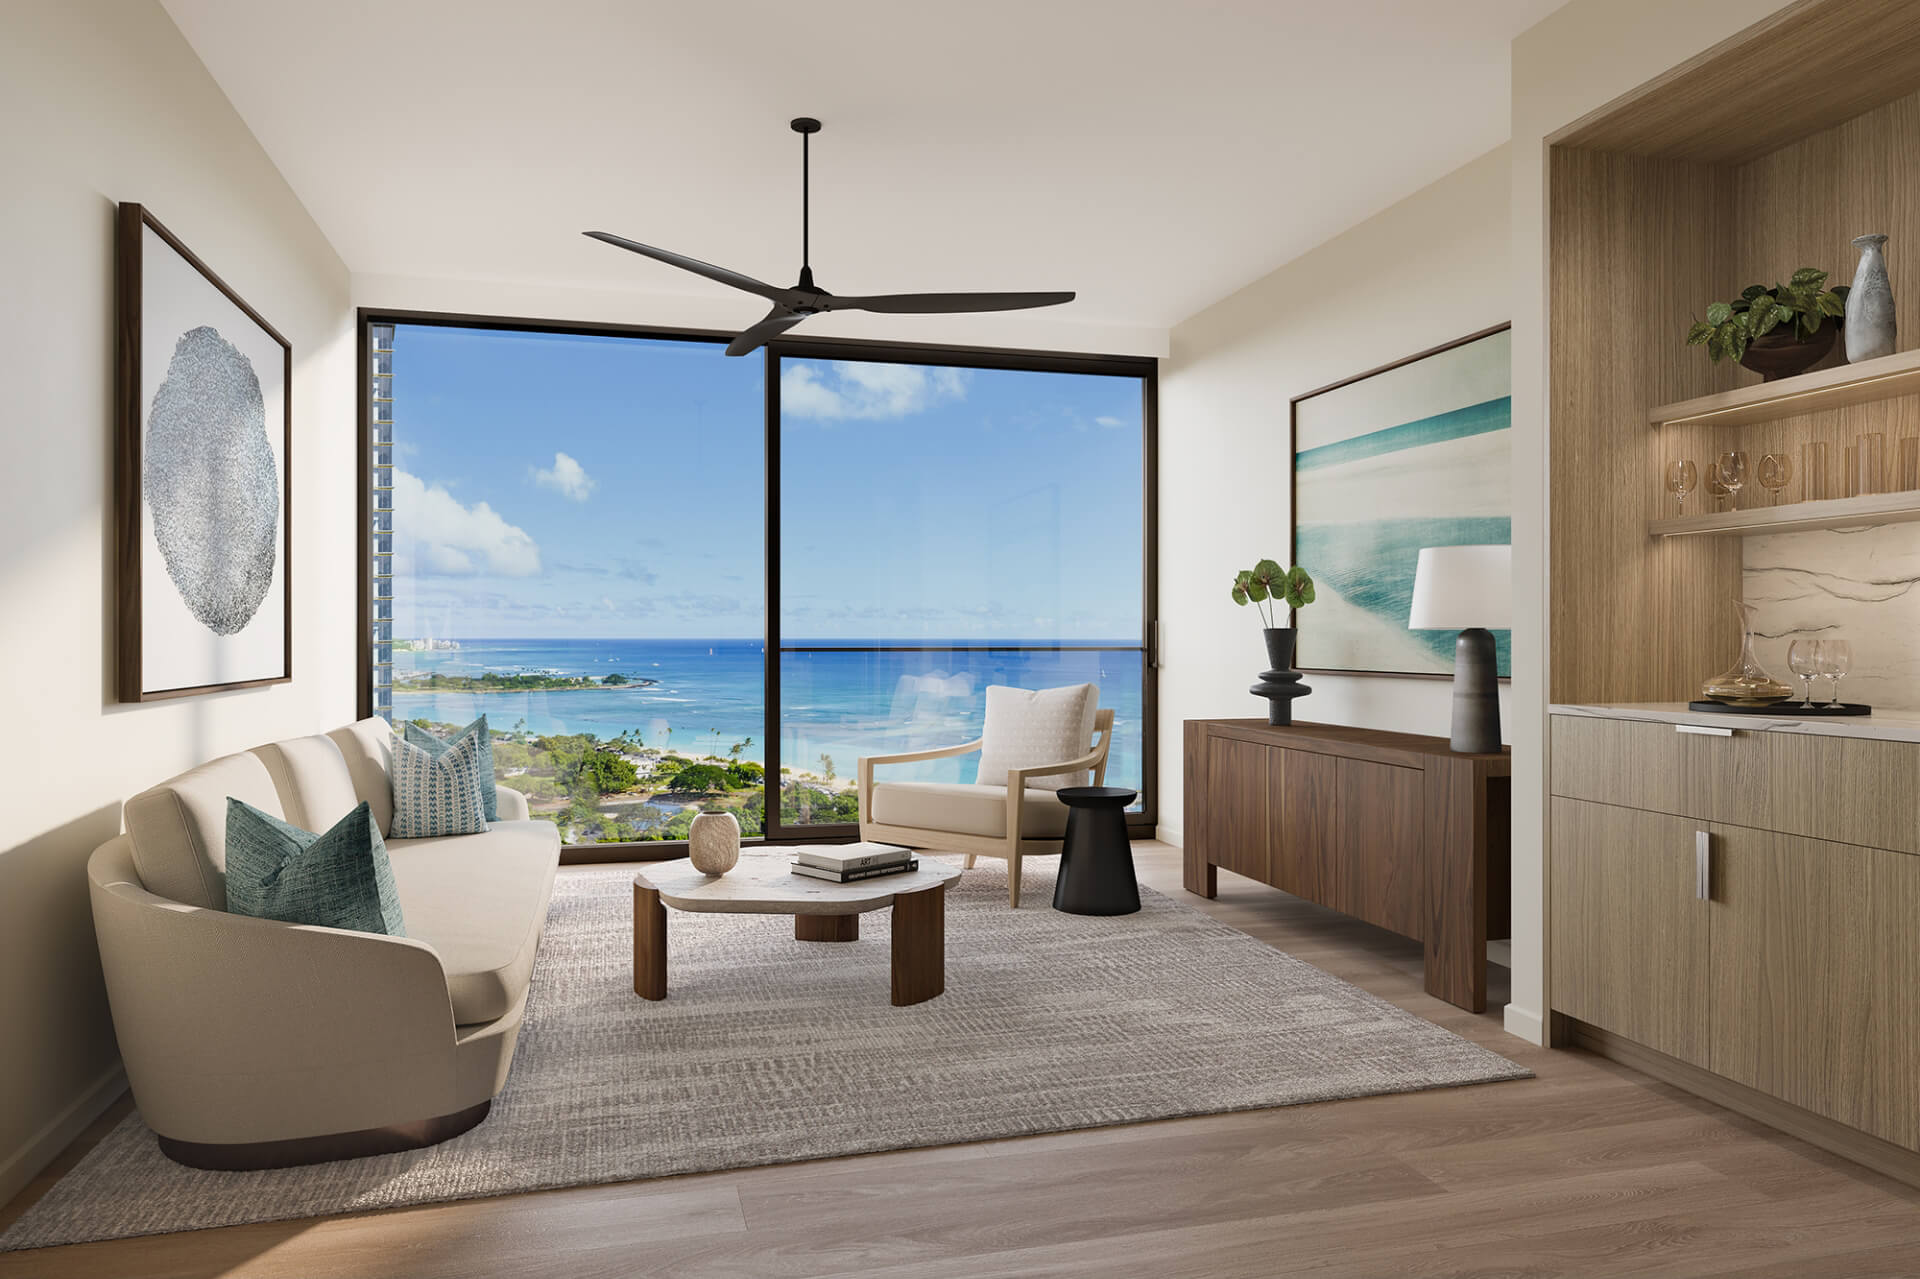 Kalae two bedroom Residence 10 Living Room with park and ocean views.